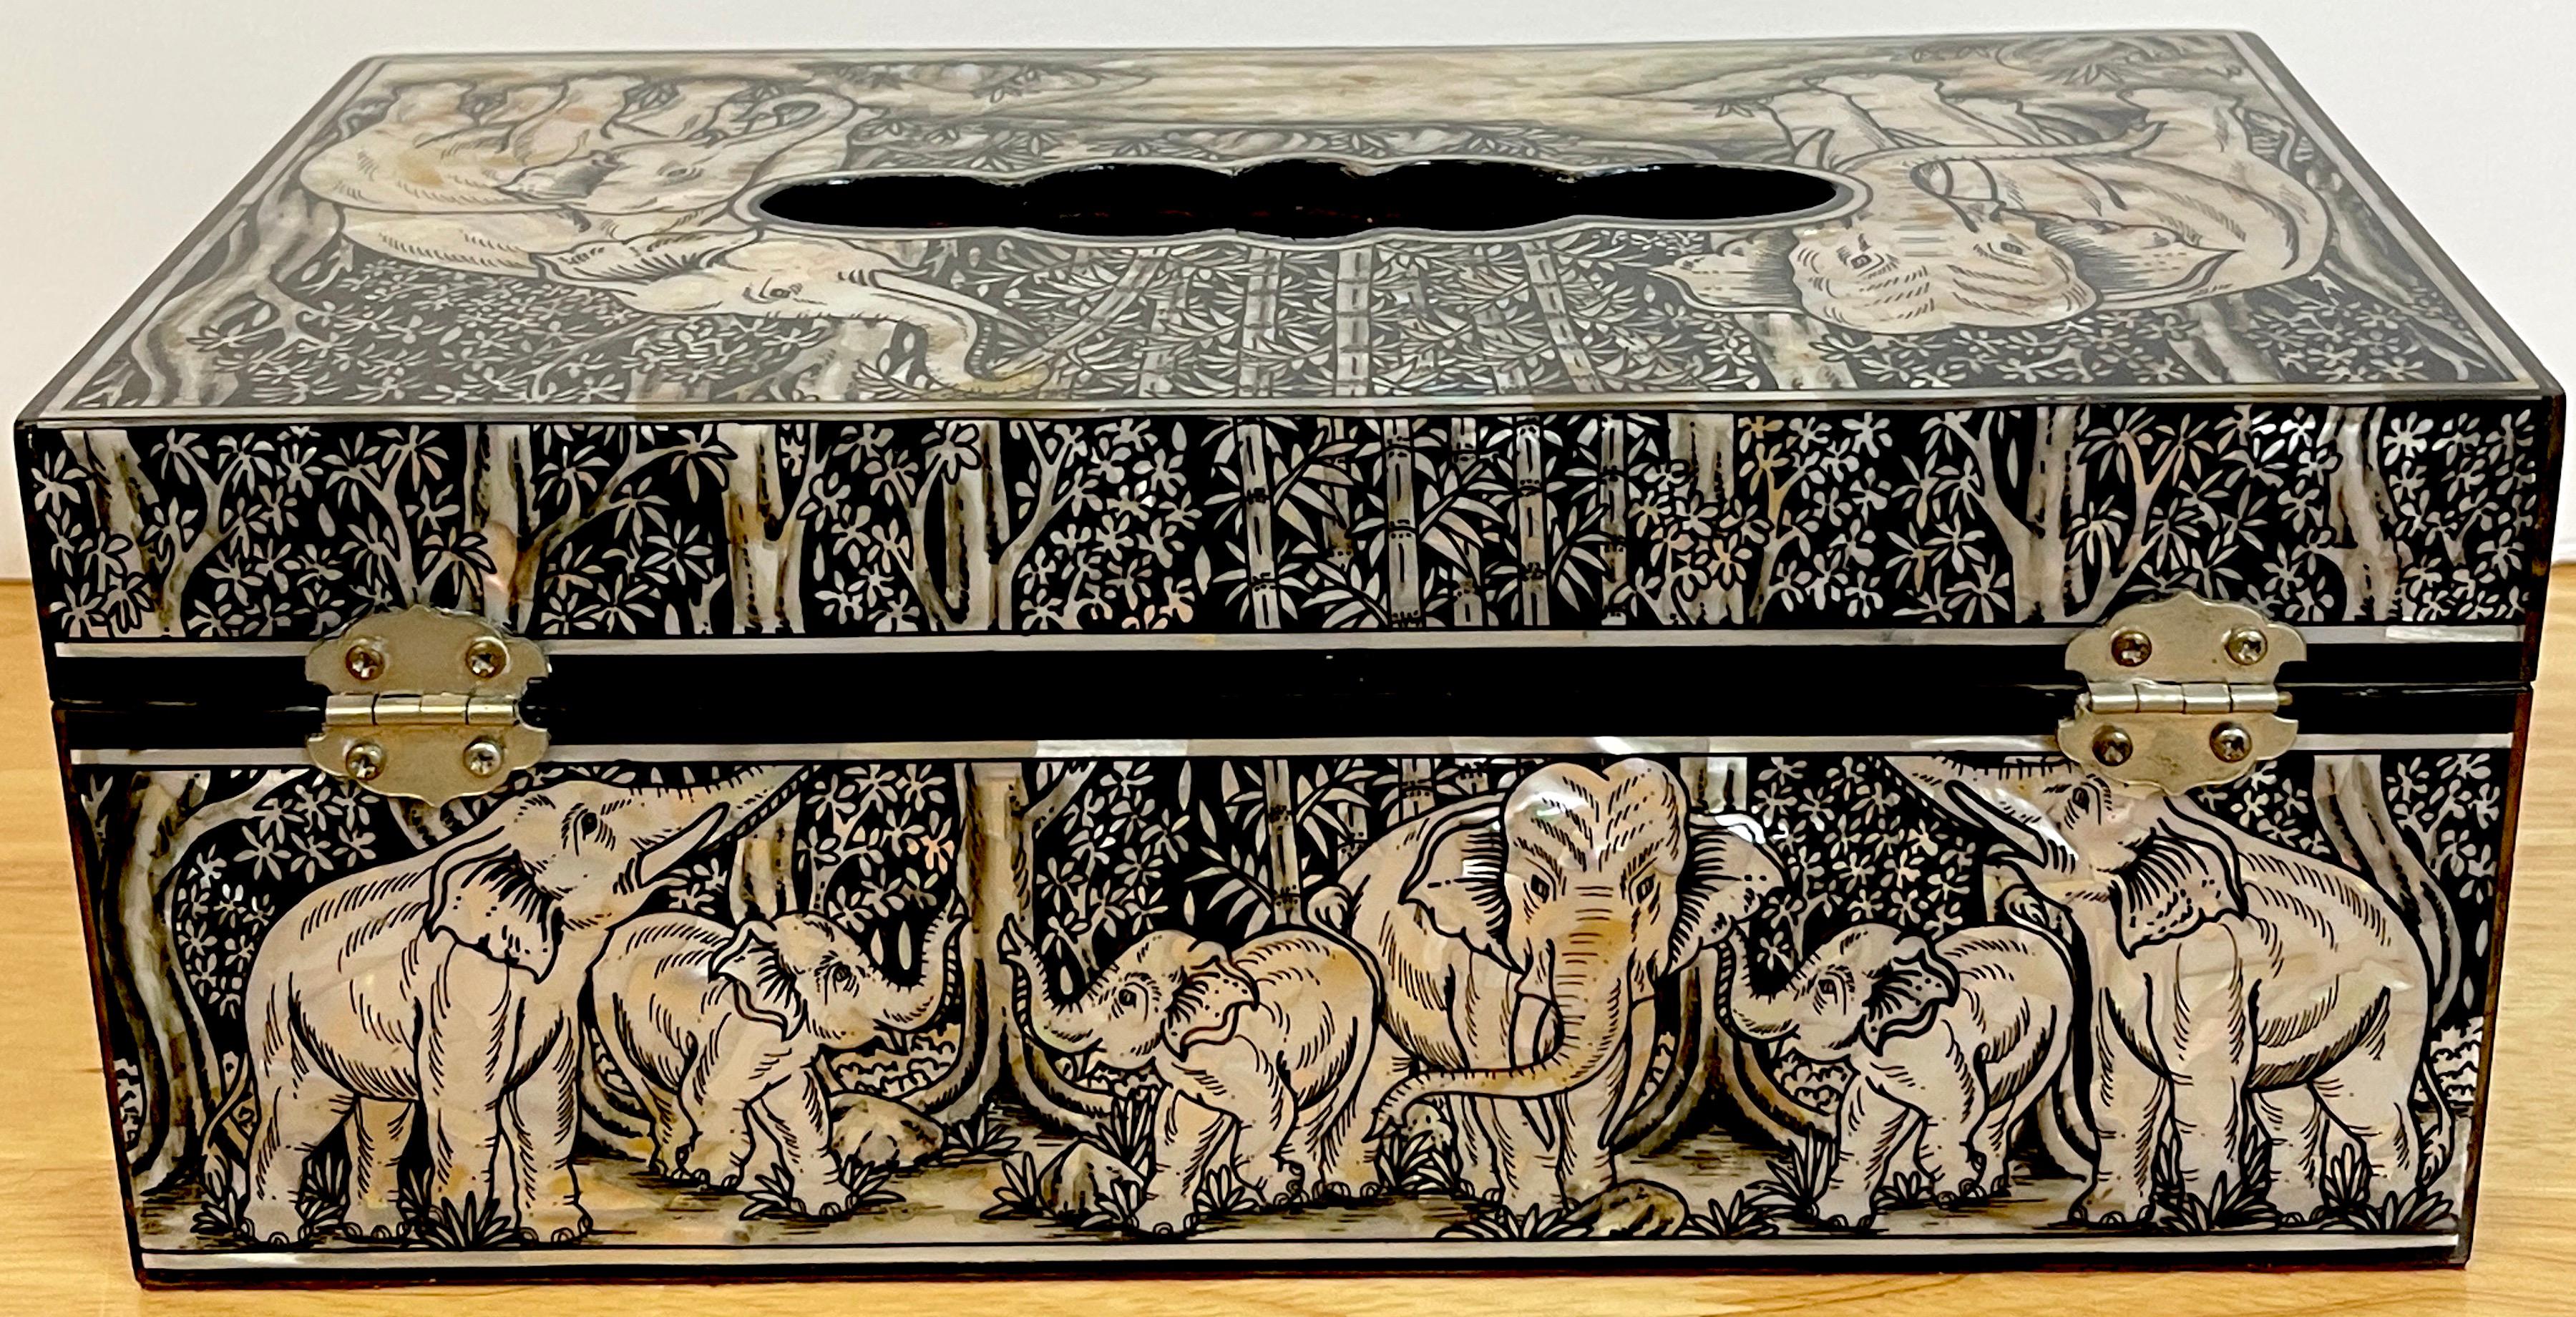 Inlay Exquisite Mother of Pearl Inlaid Lacquer Elephant Motif Tissue Box For Sale